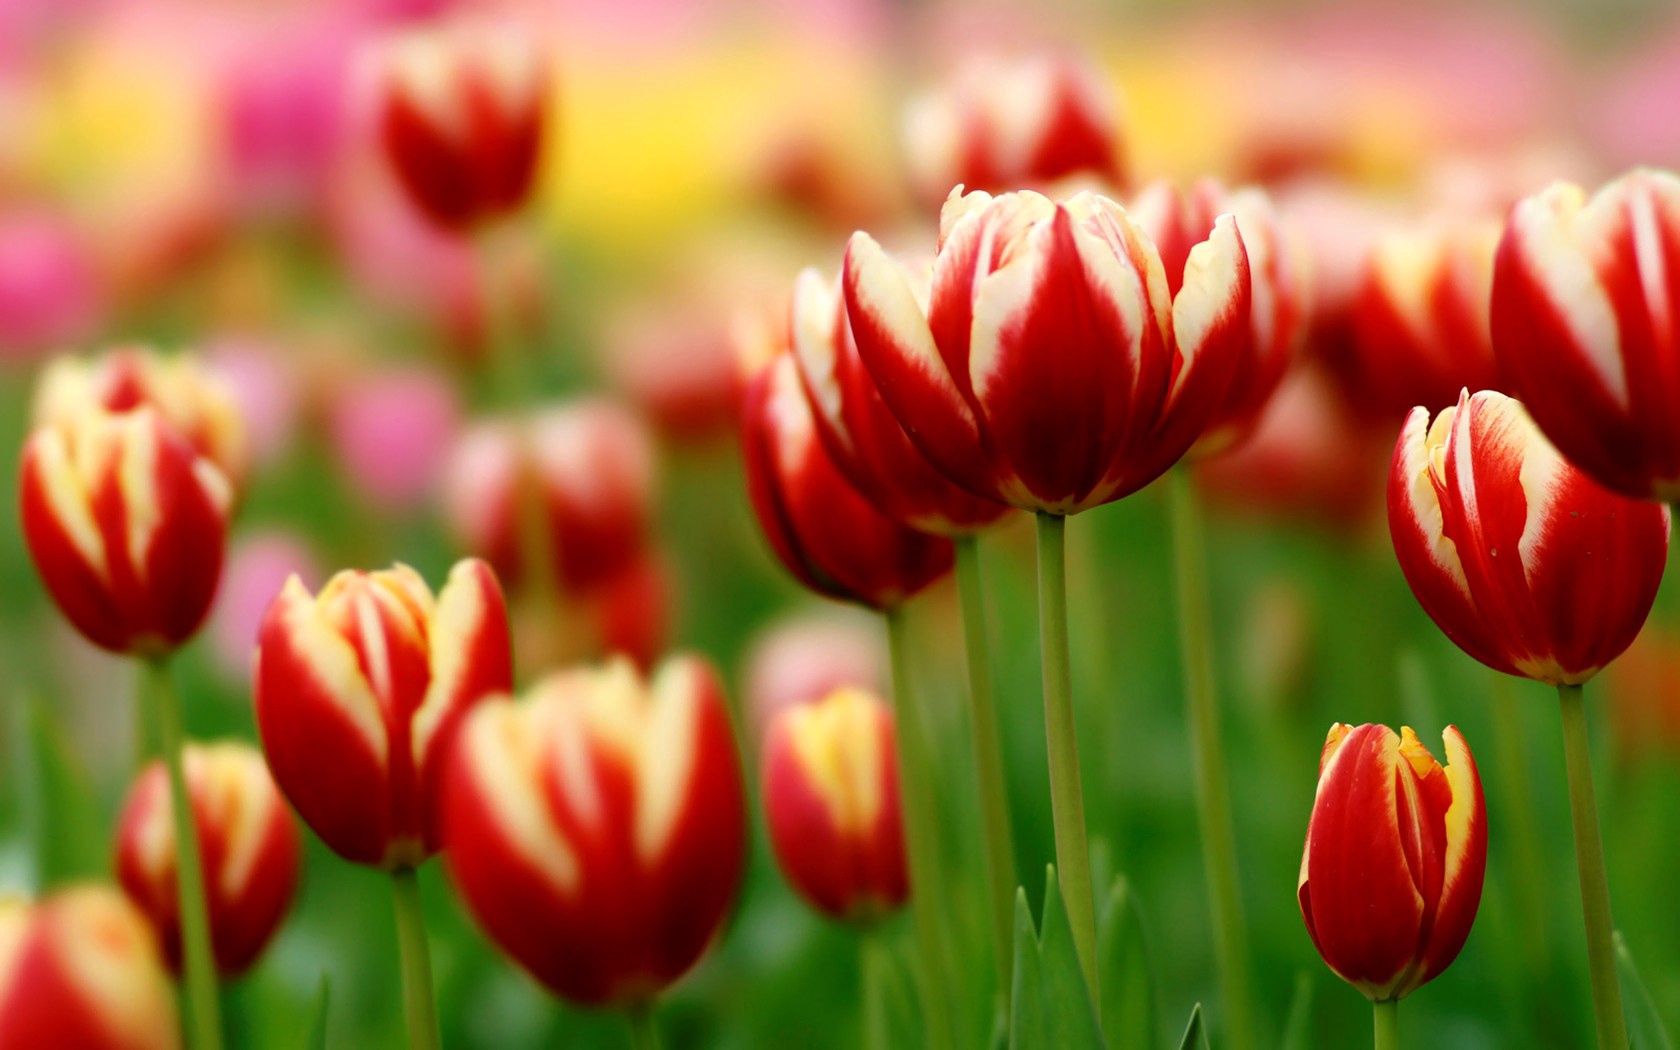 close up, flowers, tulips, flower bed, flowerbed, variegated, mottled QHD